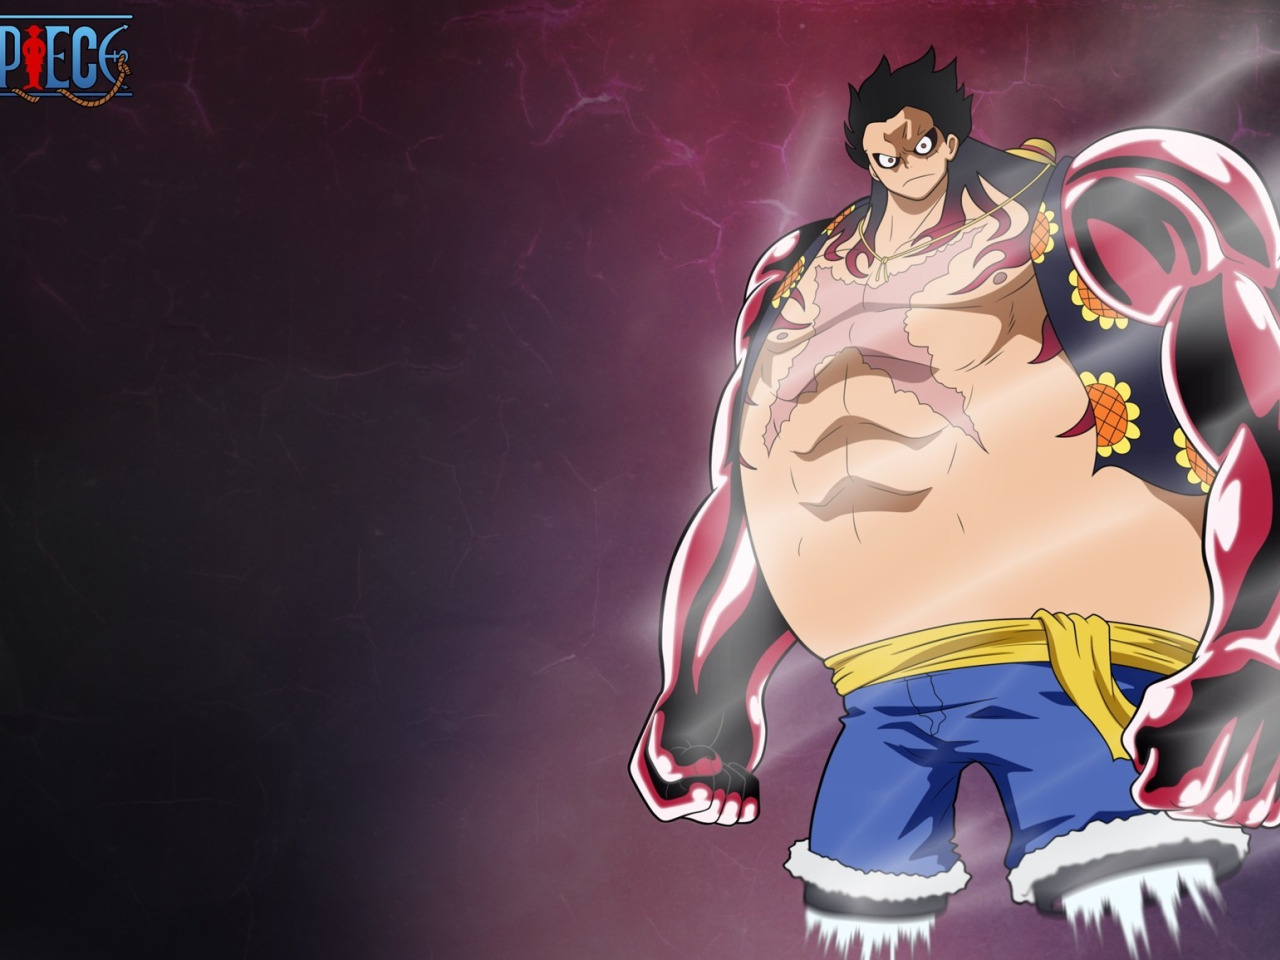 Download wallpaper game, One Piece, pirate, steam, anime, boy, captain,  warrior, manga, japanese, oriental, strong, muscular, scar, supernova,  Luffy, section shonen in resolution 1280x960